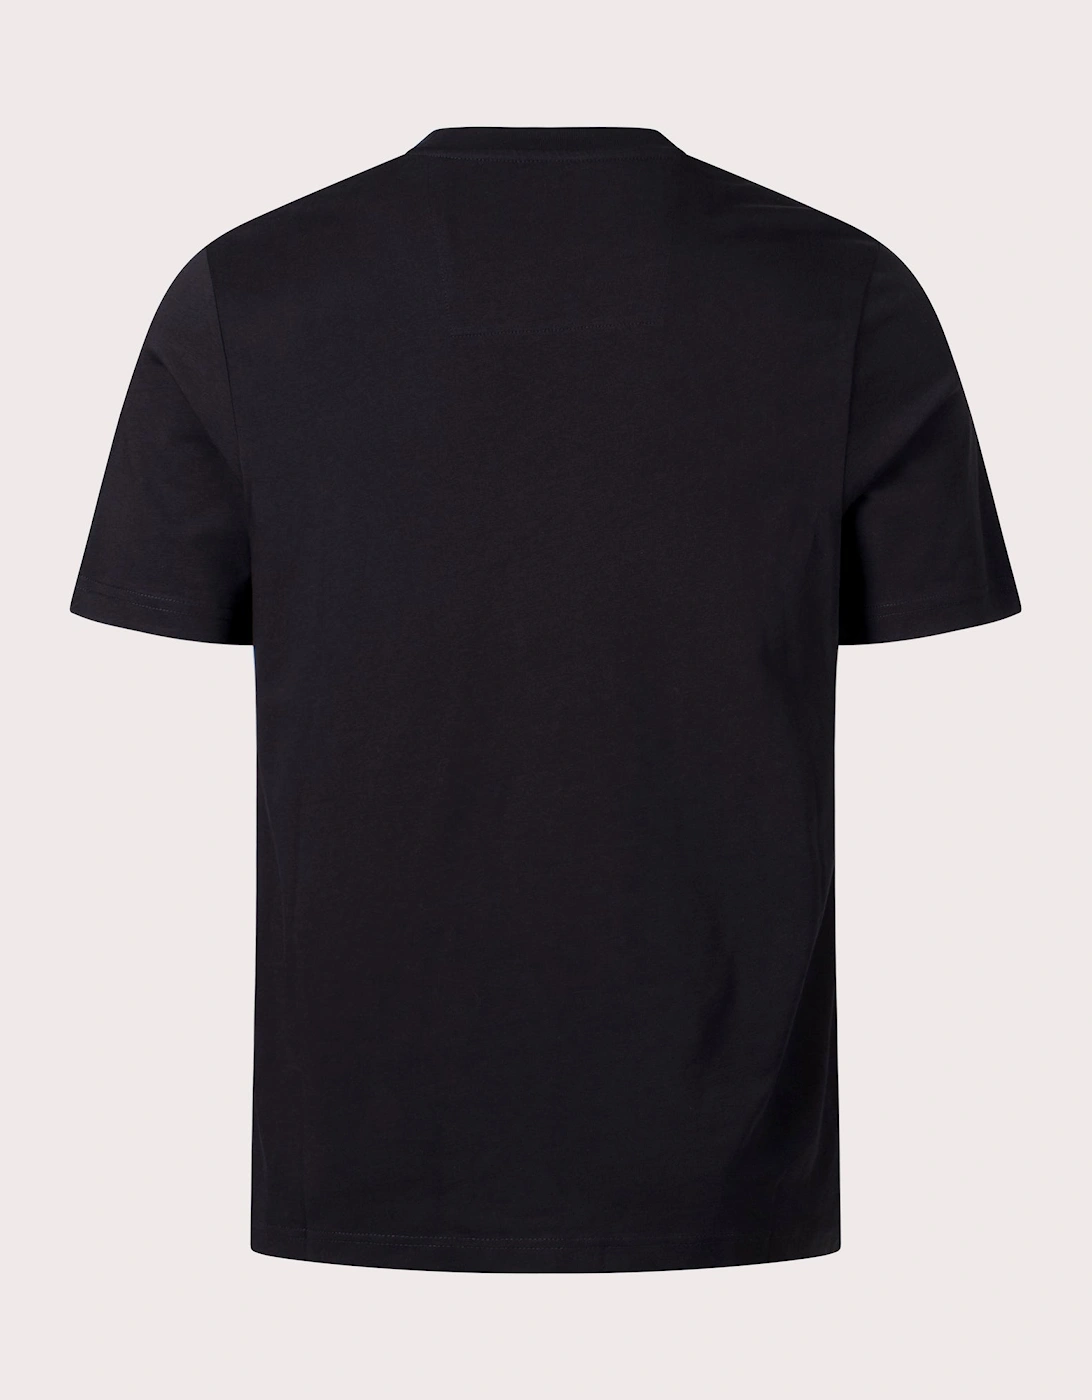 Relaxed Fit Injection T-Shirt